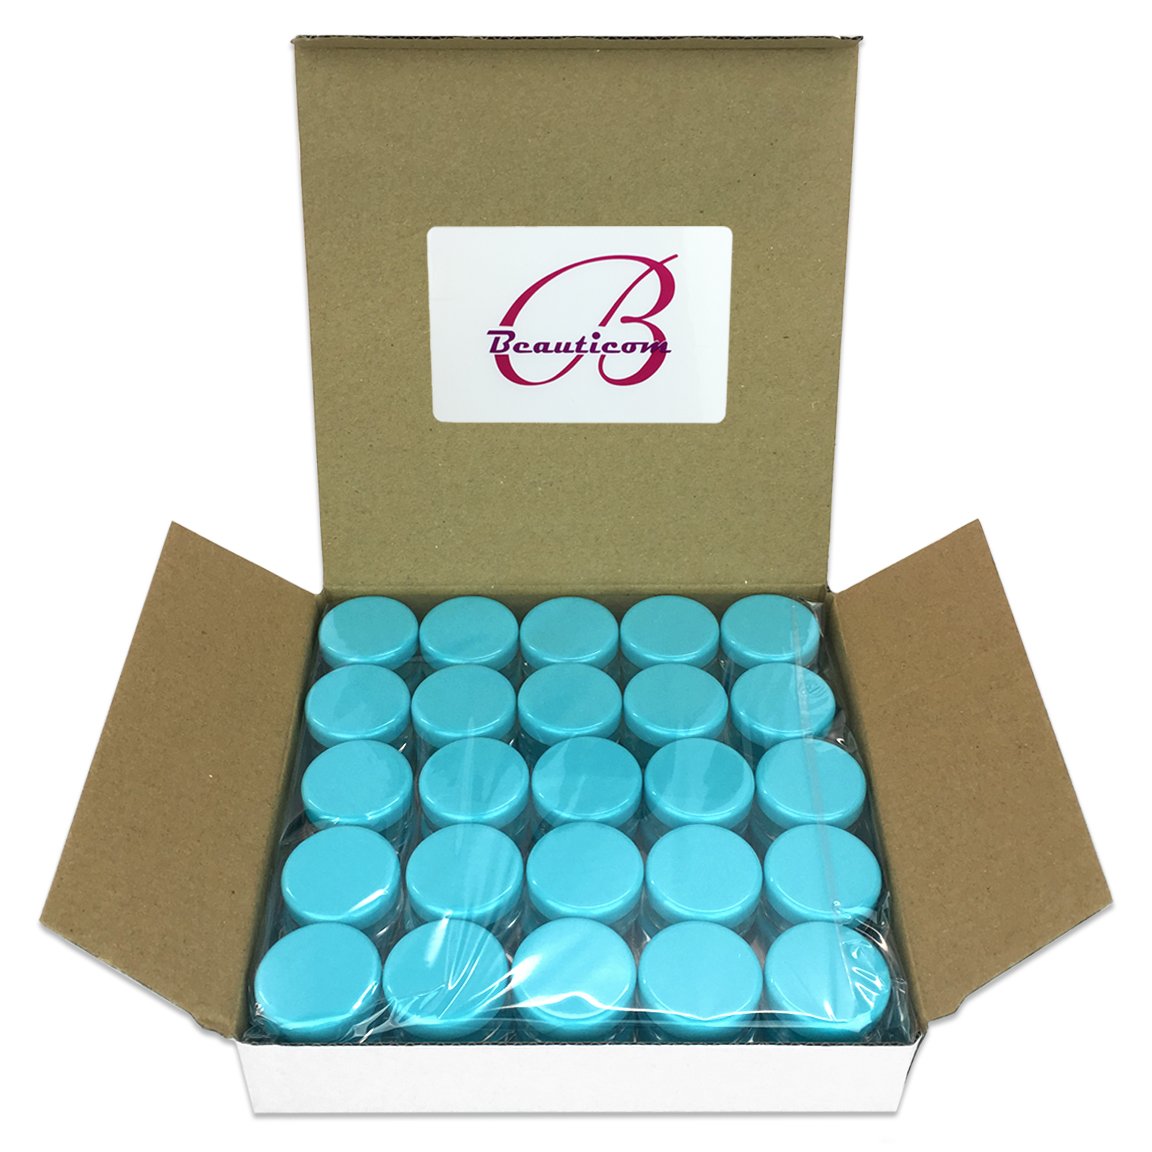 (Quantity: 50 Pieces) Beauticom 5G/5ML Round Clear Jars with Teal Sky Blue Lids for Scrubs, Oils, Toner, Salves, Creams, Lotions, Makeup Samples, Lip Balms - BPA Free